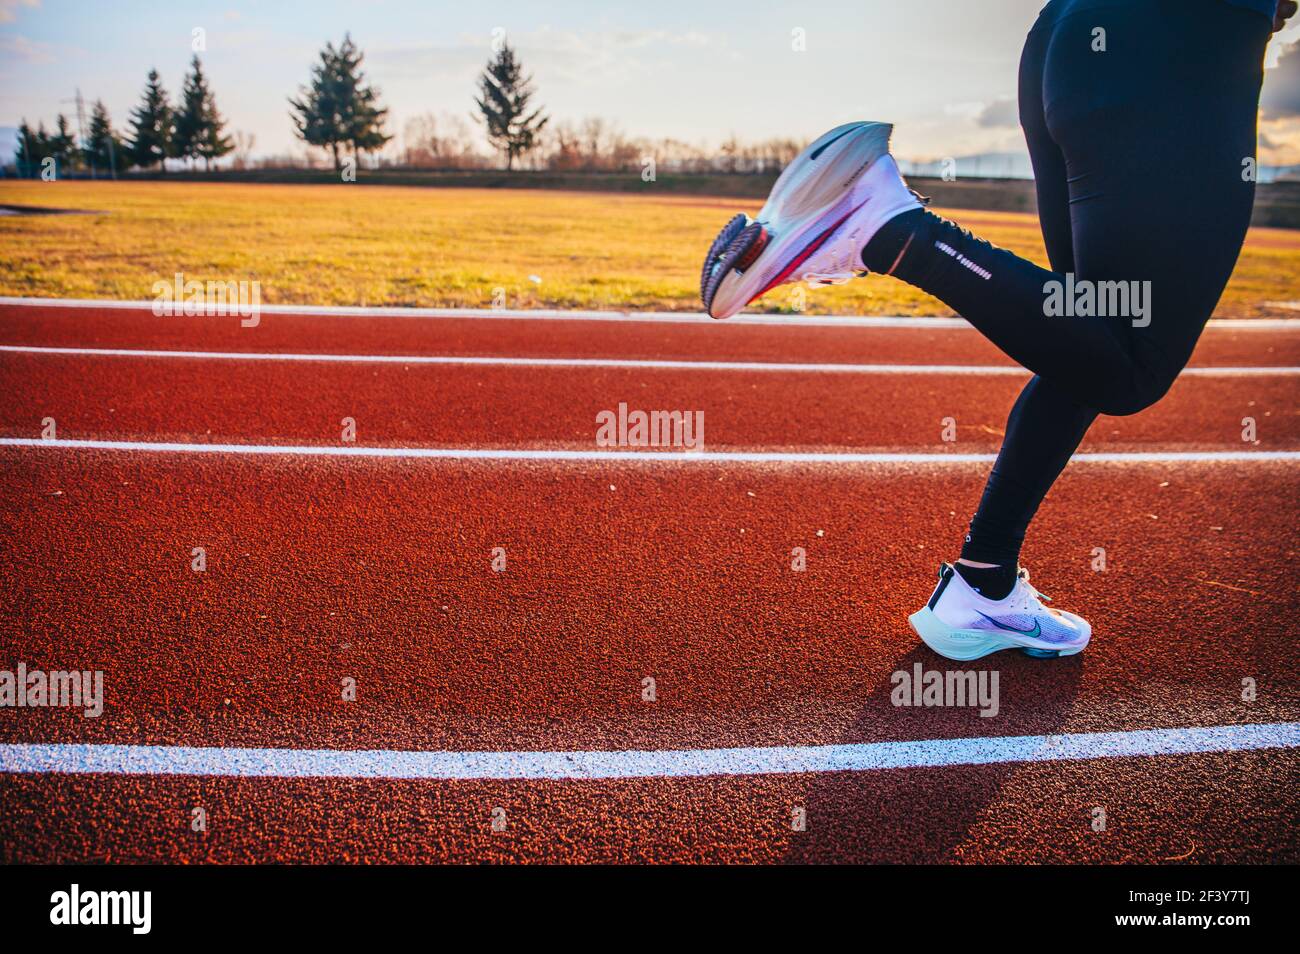 TOKYO, JAPAN, MARCH 18. 2021: Nike running shoes ALPHAFLY NEXT%. Controversial athletics shoe on legs of professional athlete running on the road. Off Stock Photo